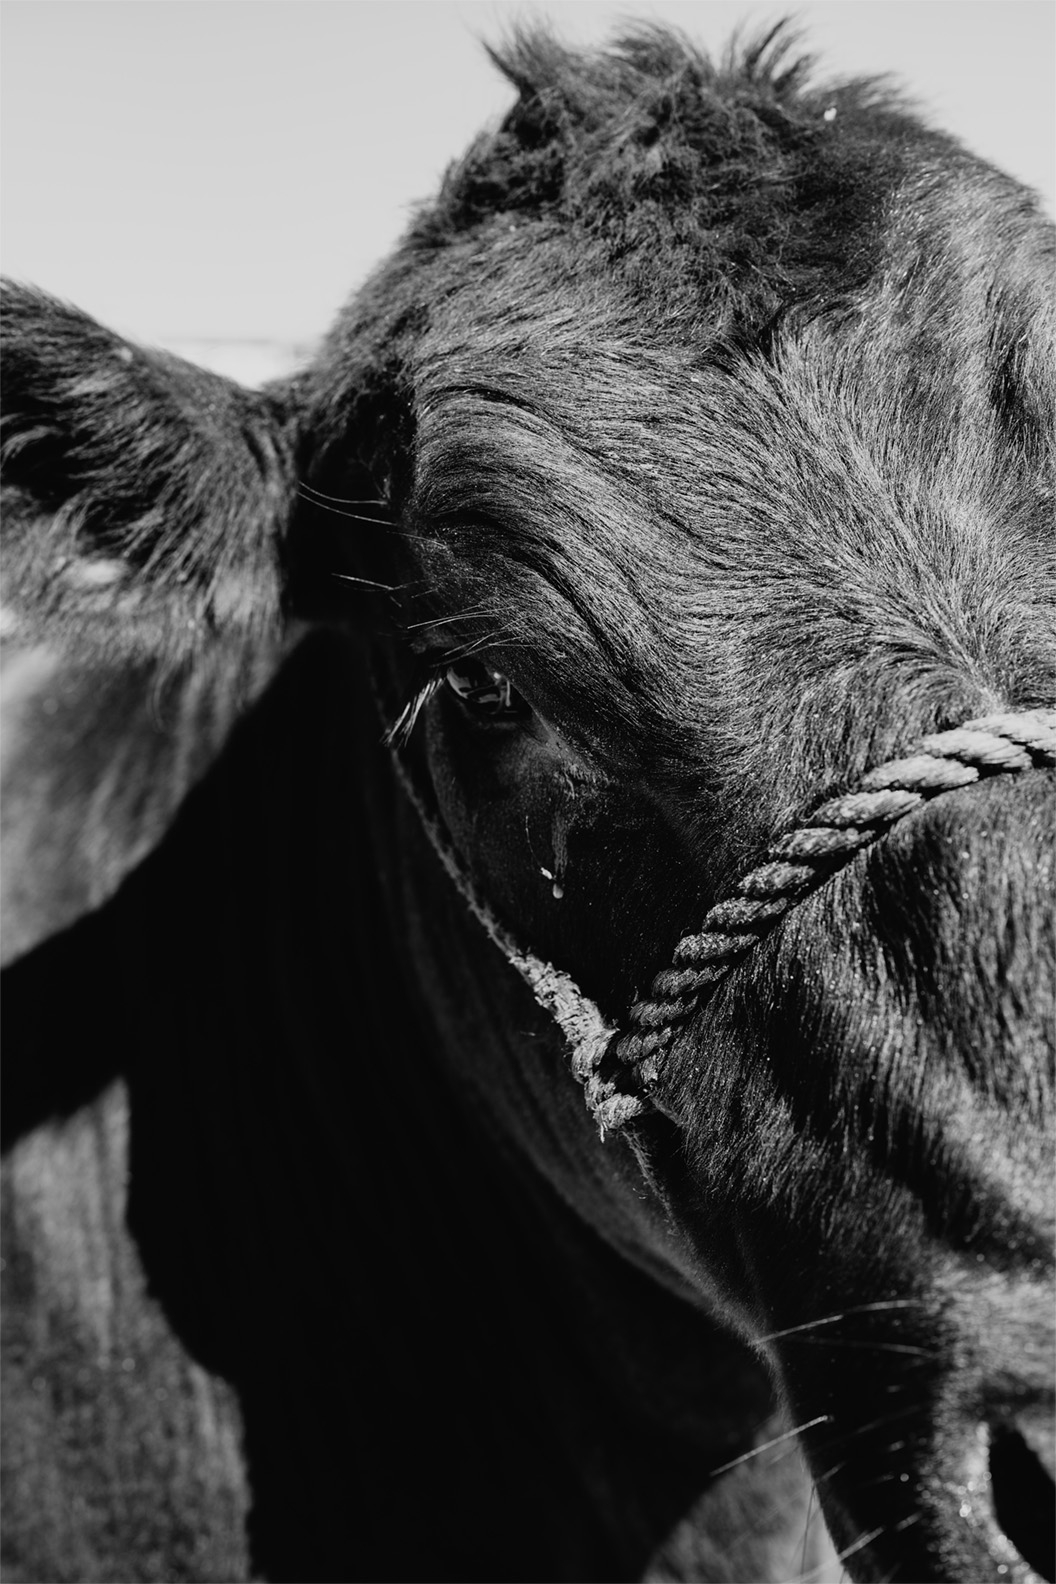 Black and white image of half a cow's face, cow wears a rope harness